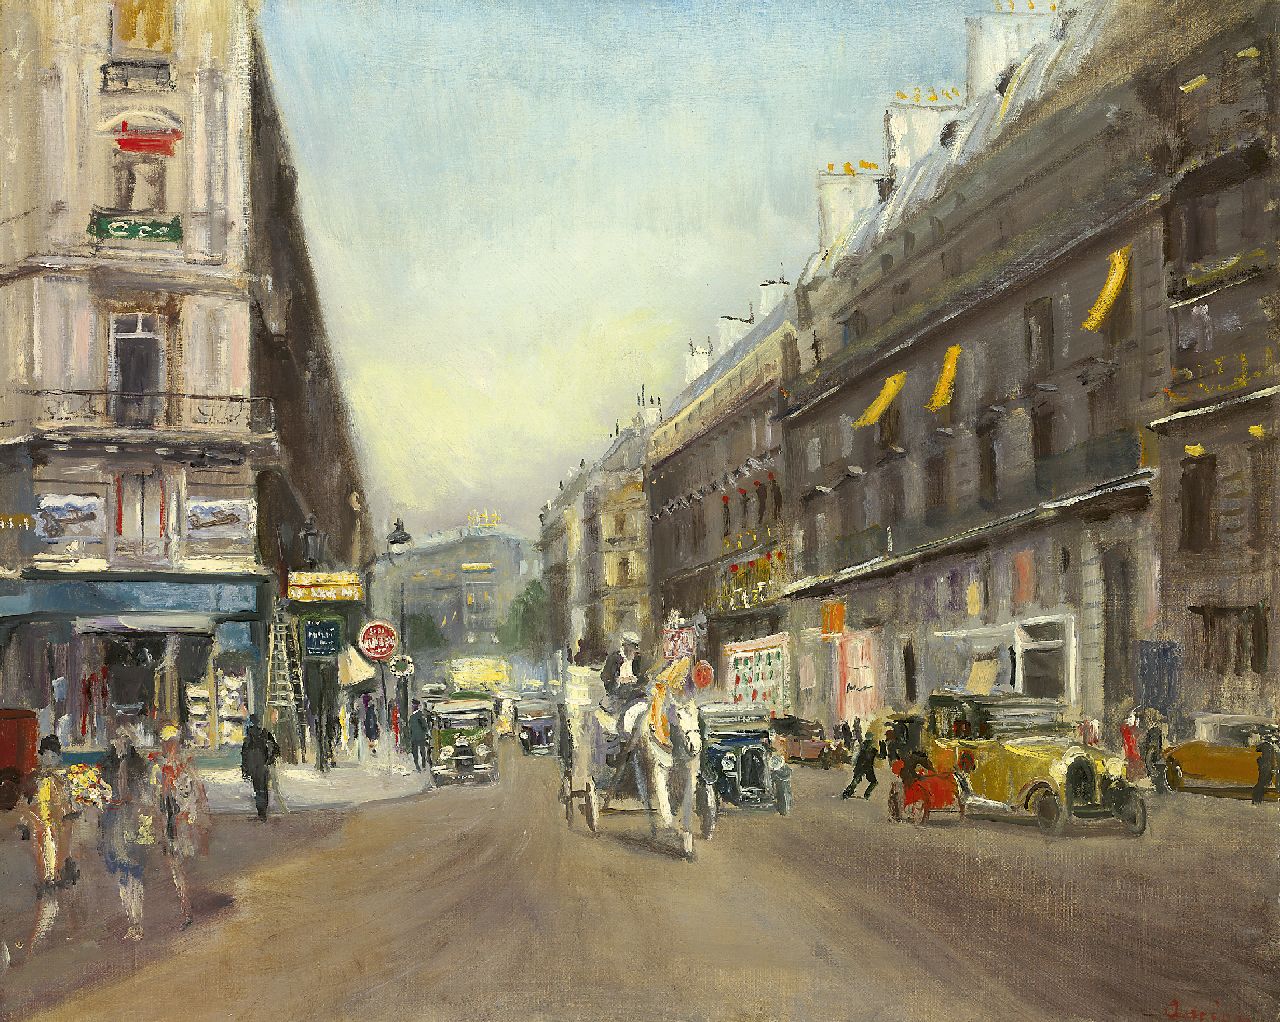 Adrion L.  | Lucien Adrion, Grand Boulevard, Paris, oil on canvas 65.0 x 80.9 cm, signed l.r. and dated 1929 (on a label)